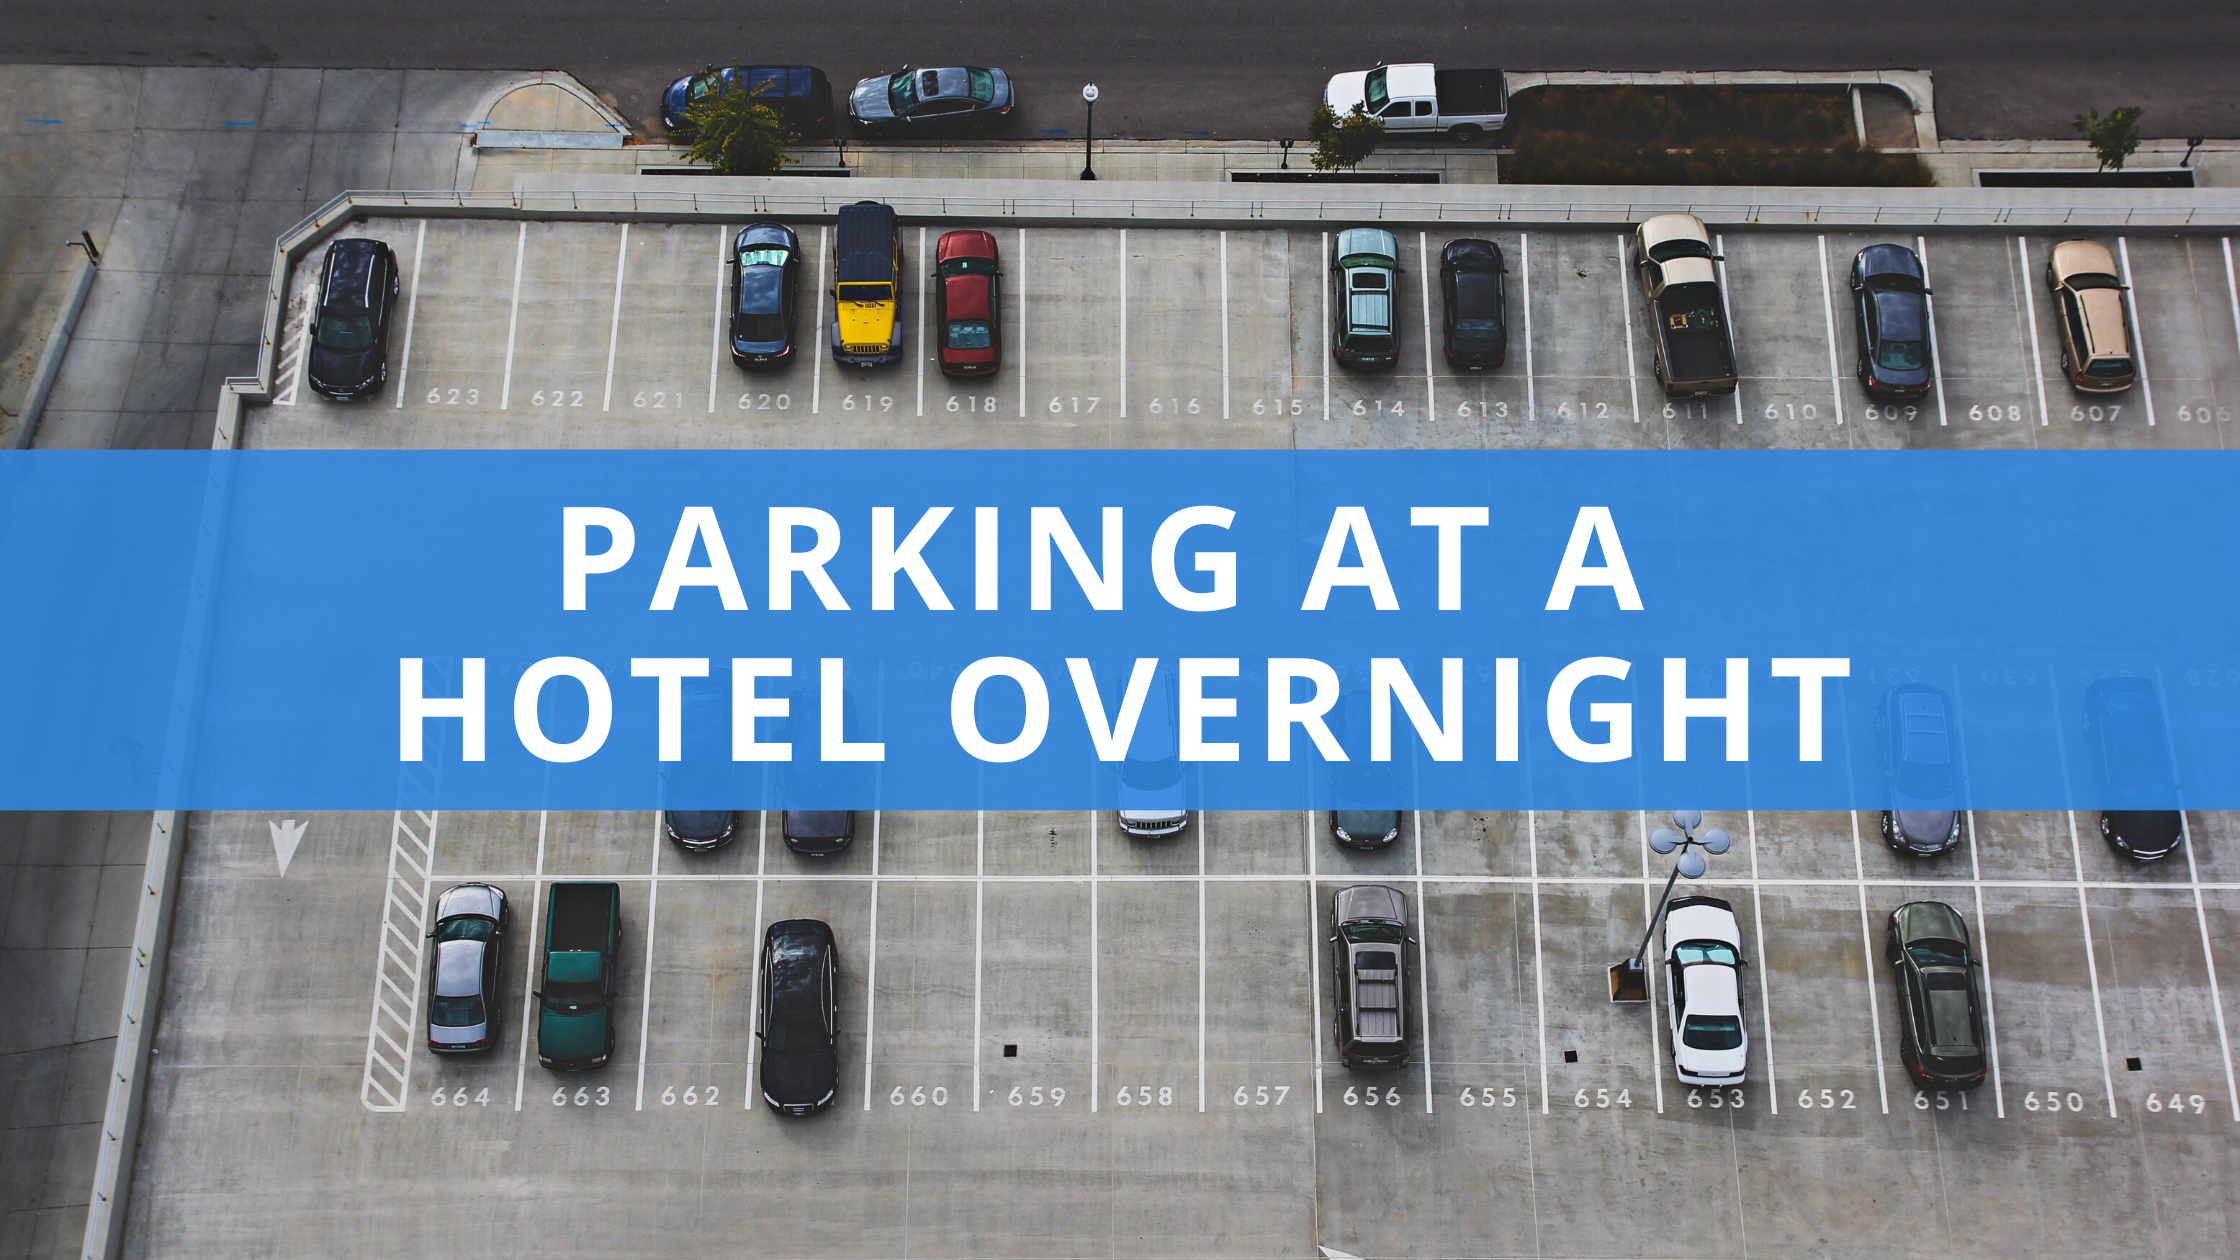 Can you park at a hotel without staying there?